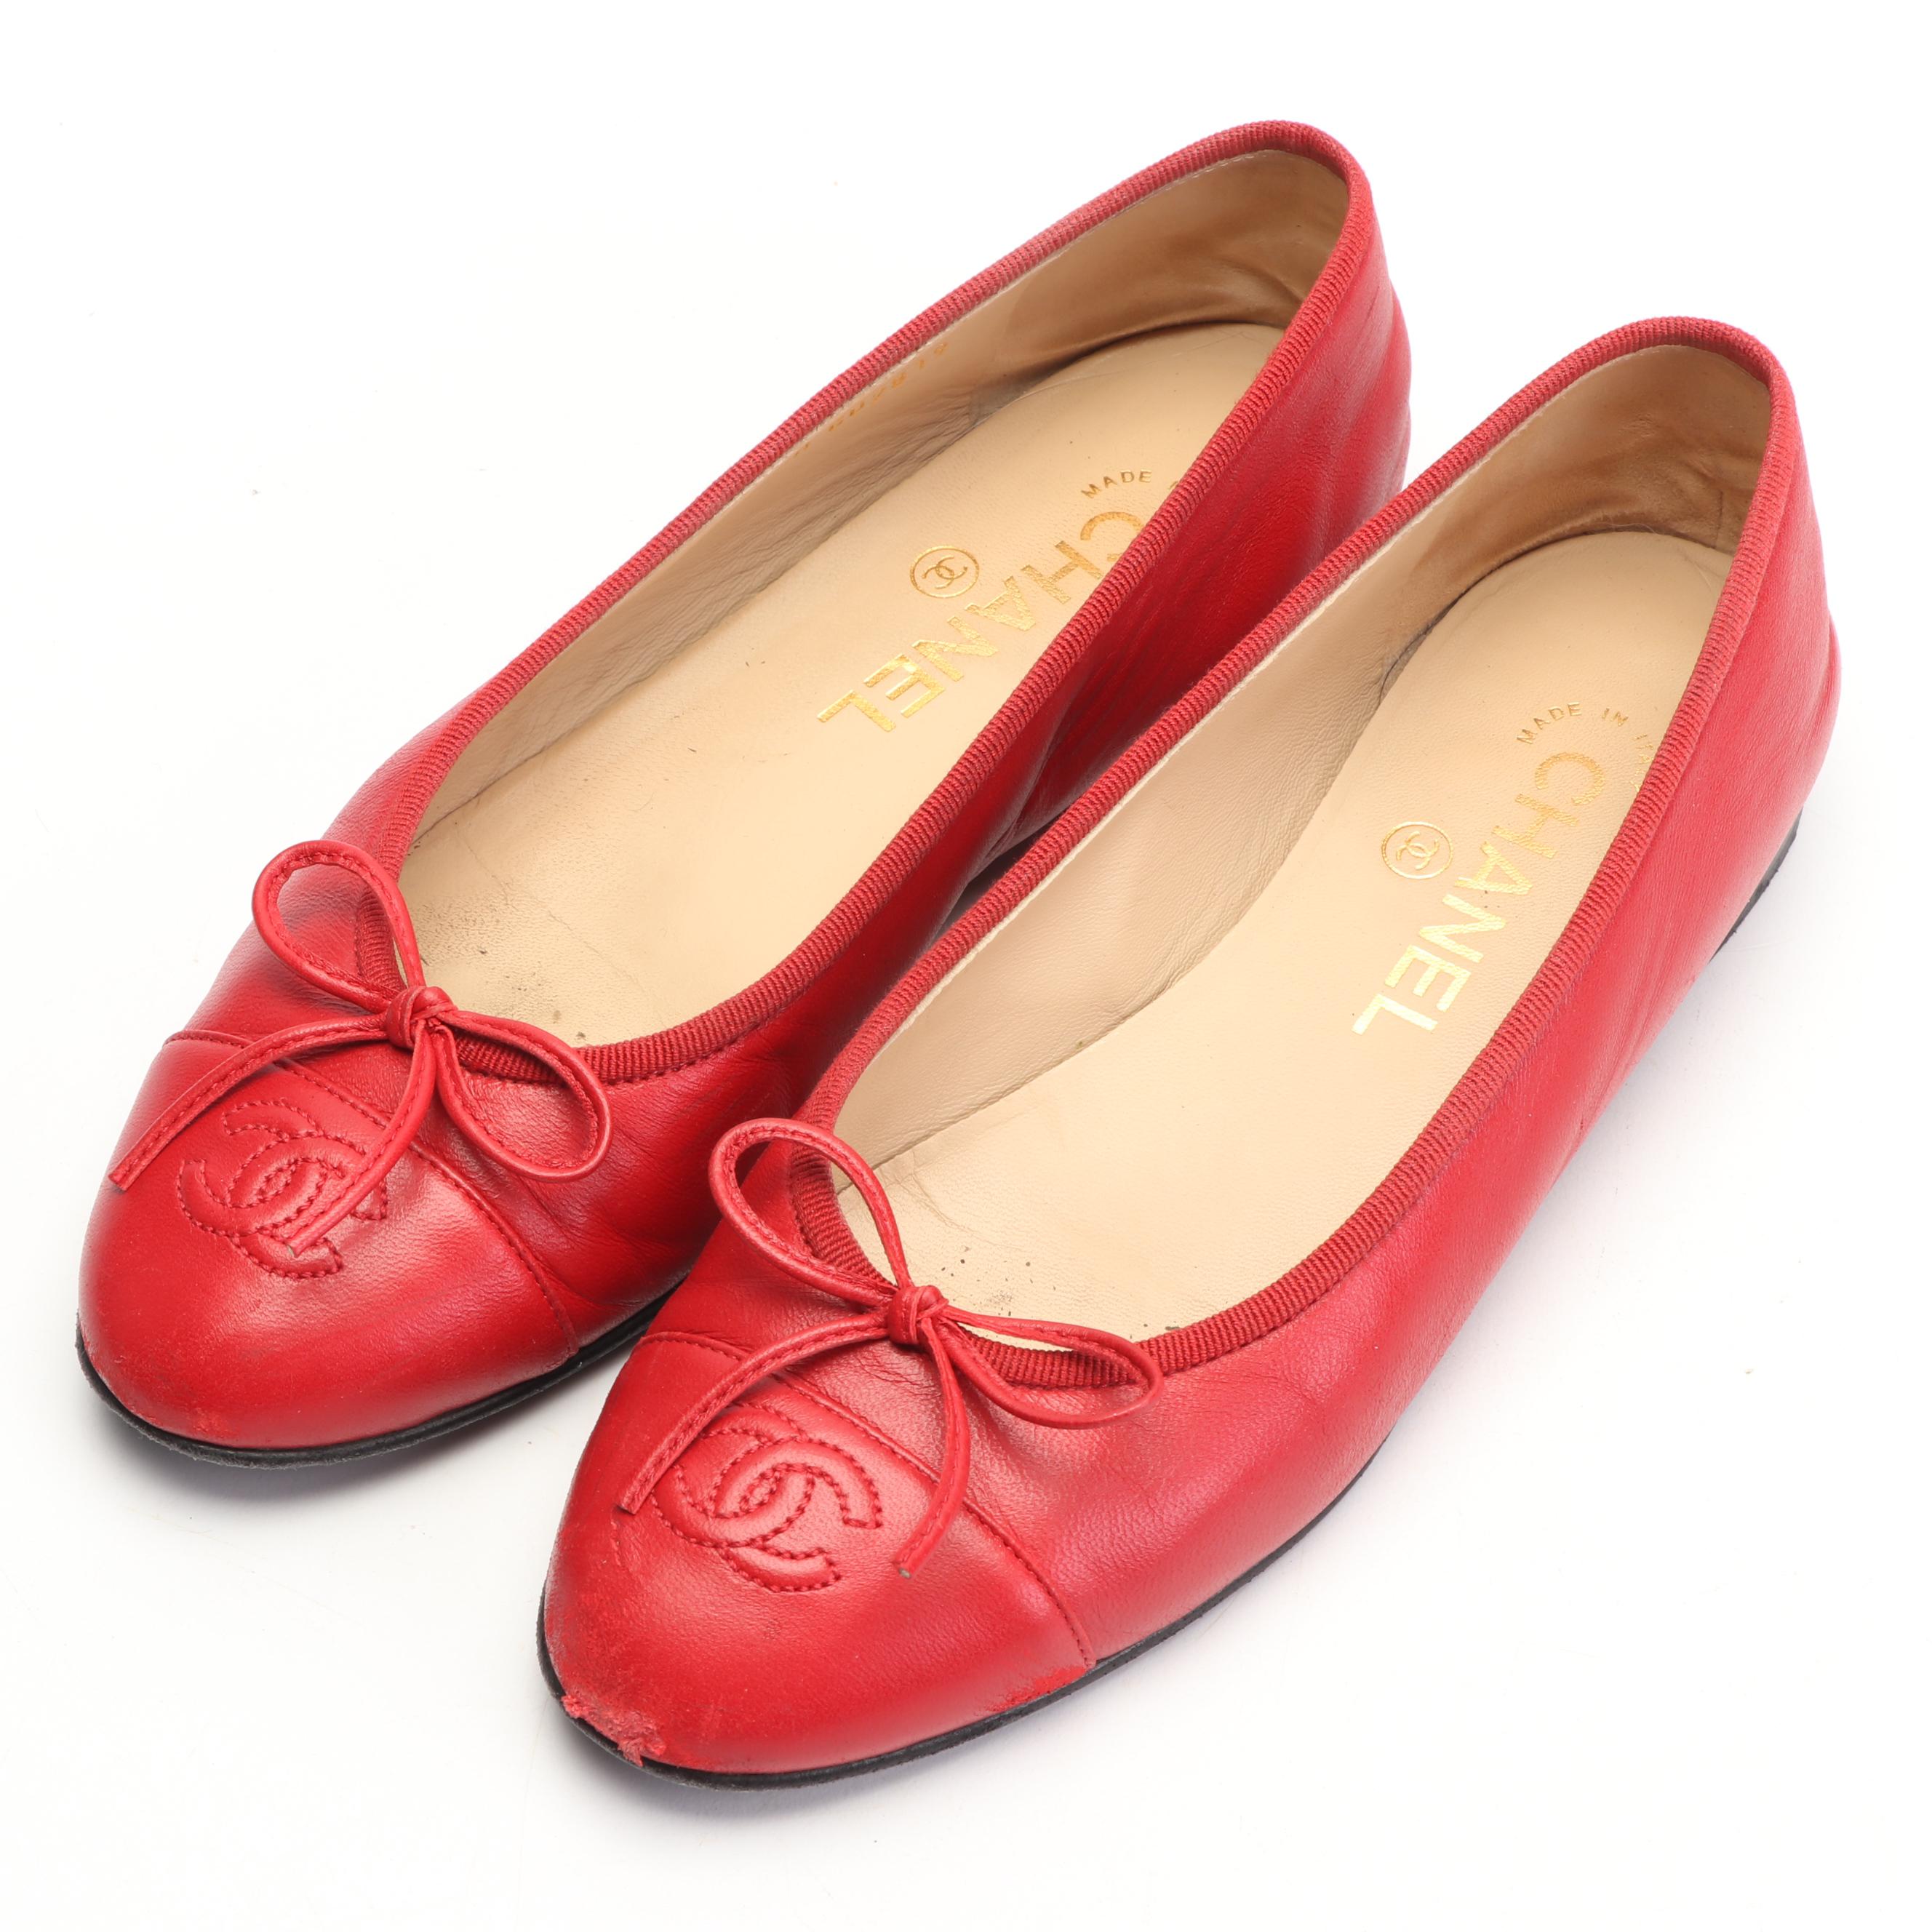 chanel red flats